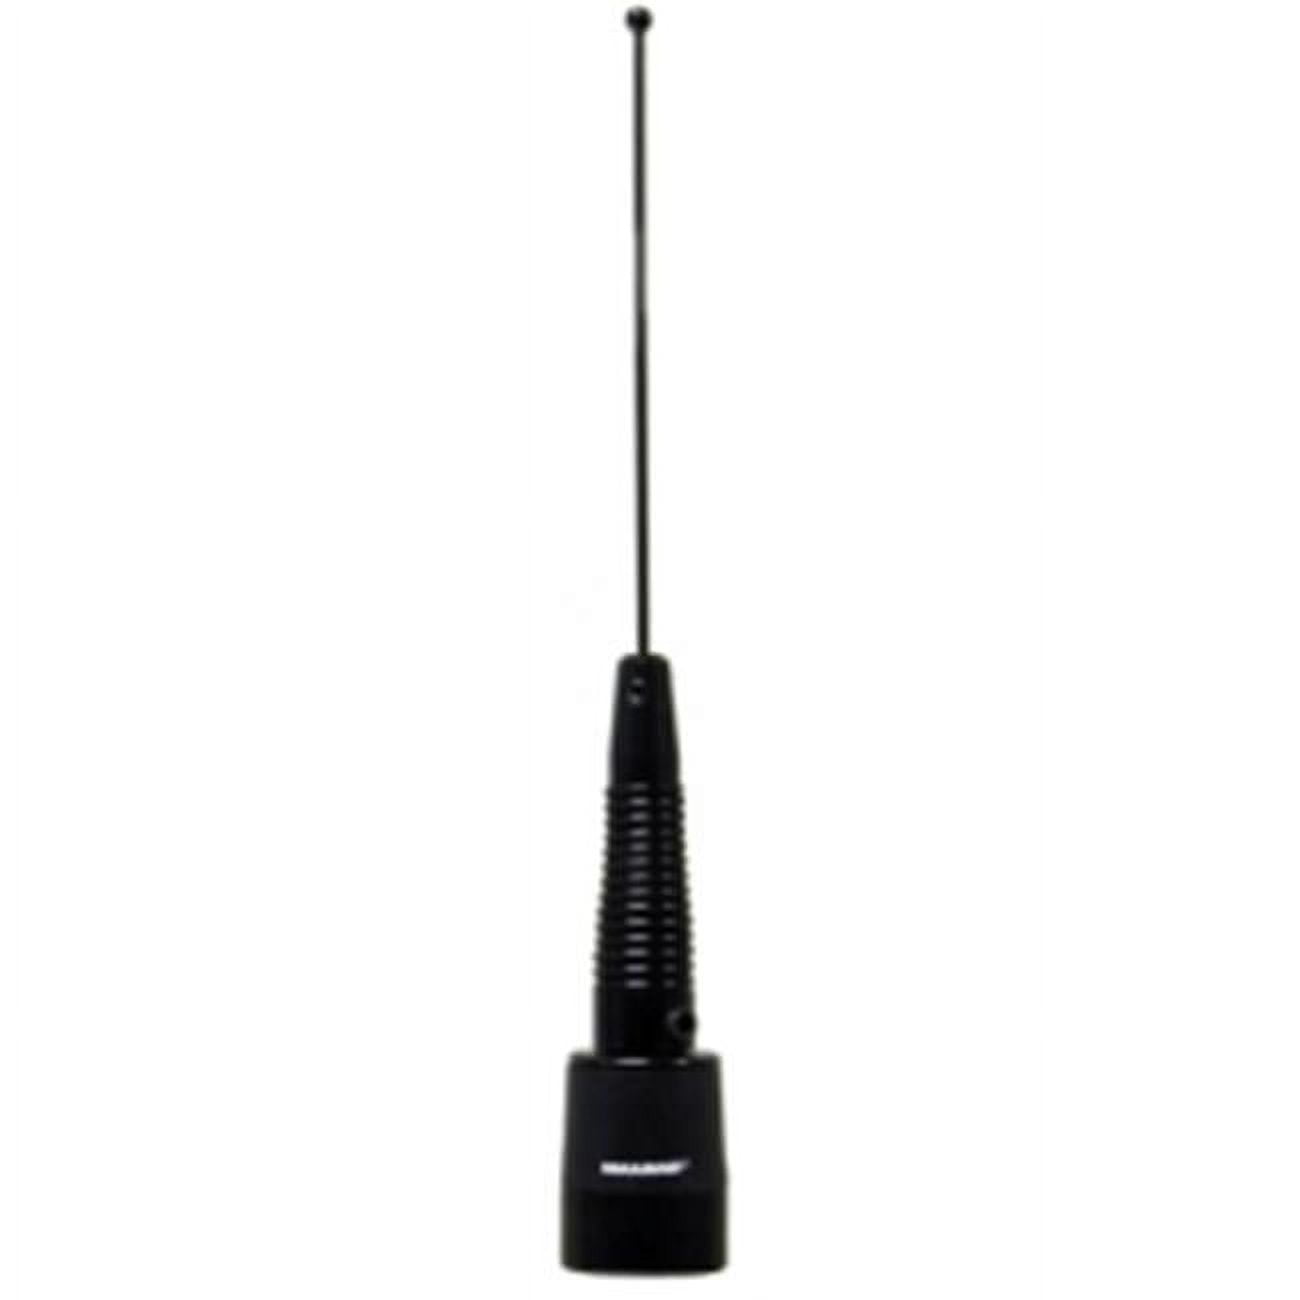 Picture of PCTEL-Maxrad BMWV1365S 136-174MHz Unity Gain Wide Band Antenna with Spring, Black